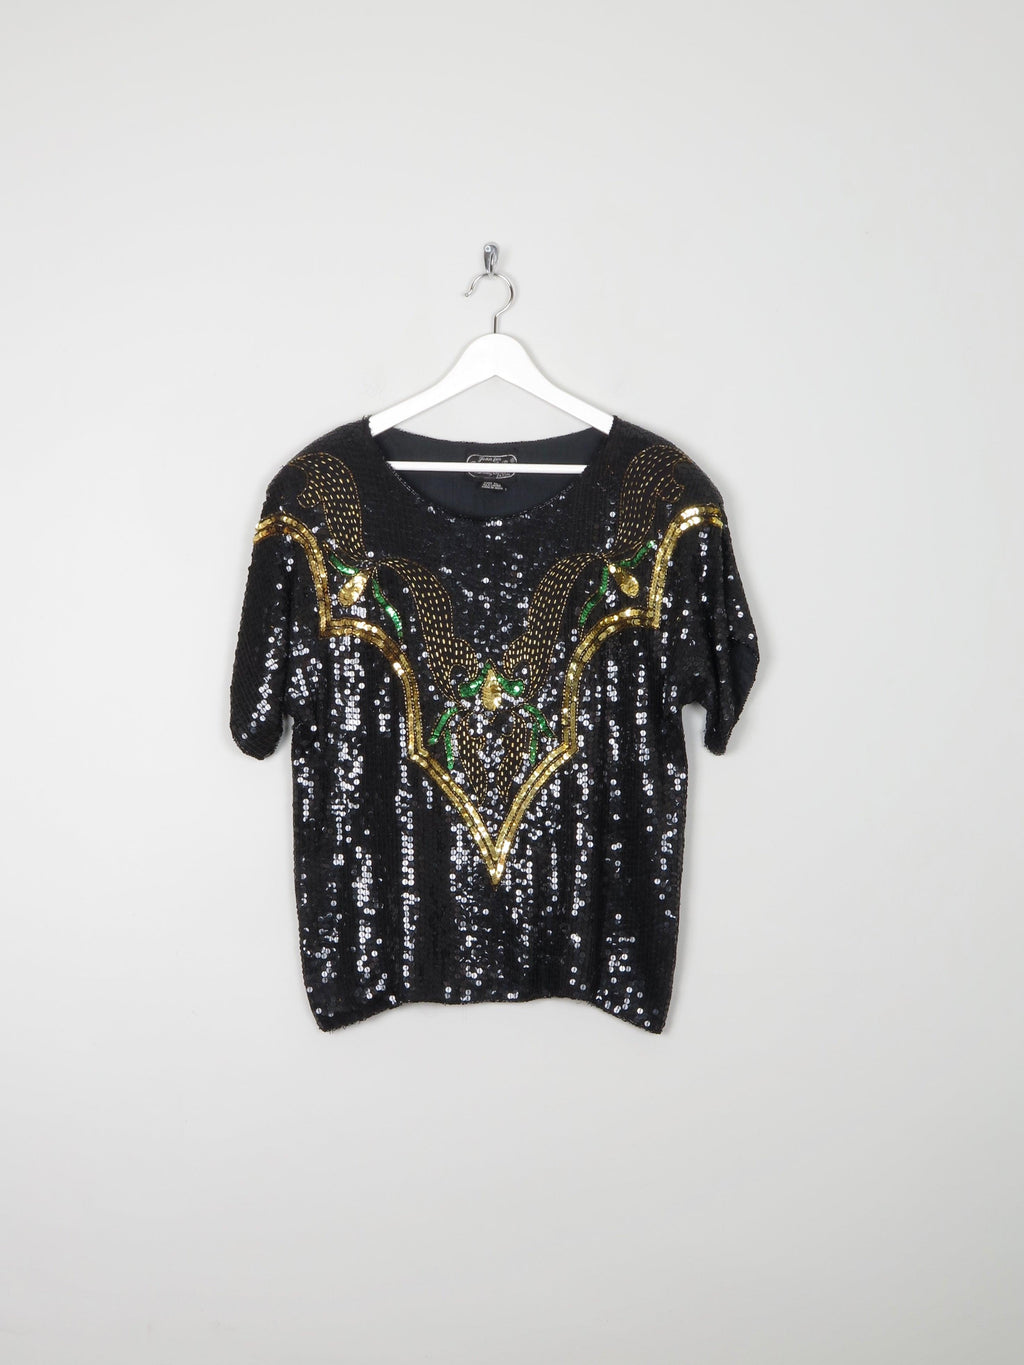 Black Vintage Sequin 1980s Top With Beading S 8/10  Relaxed Fit - The Harlequin